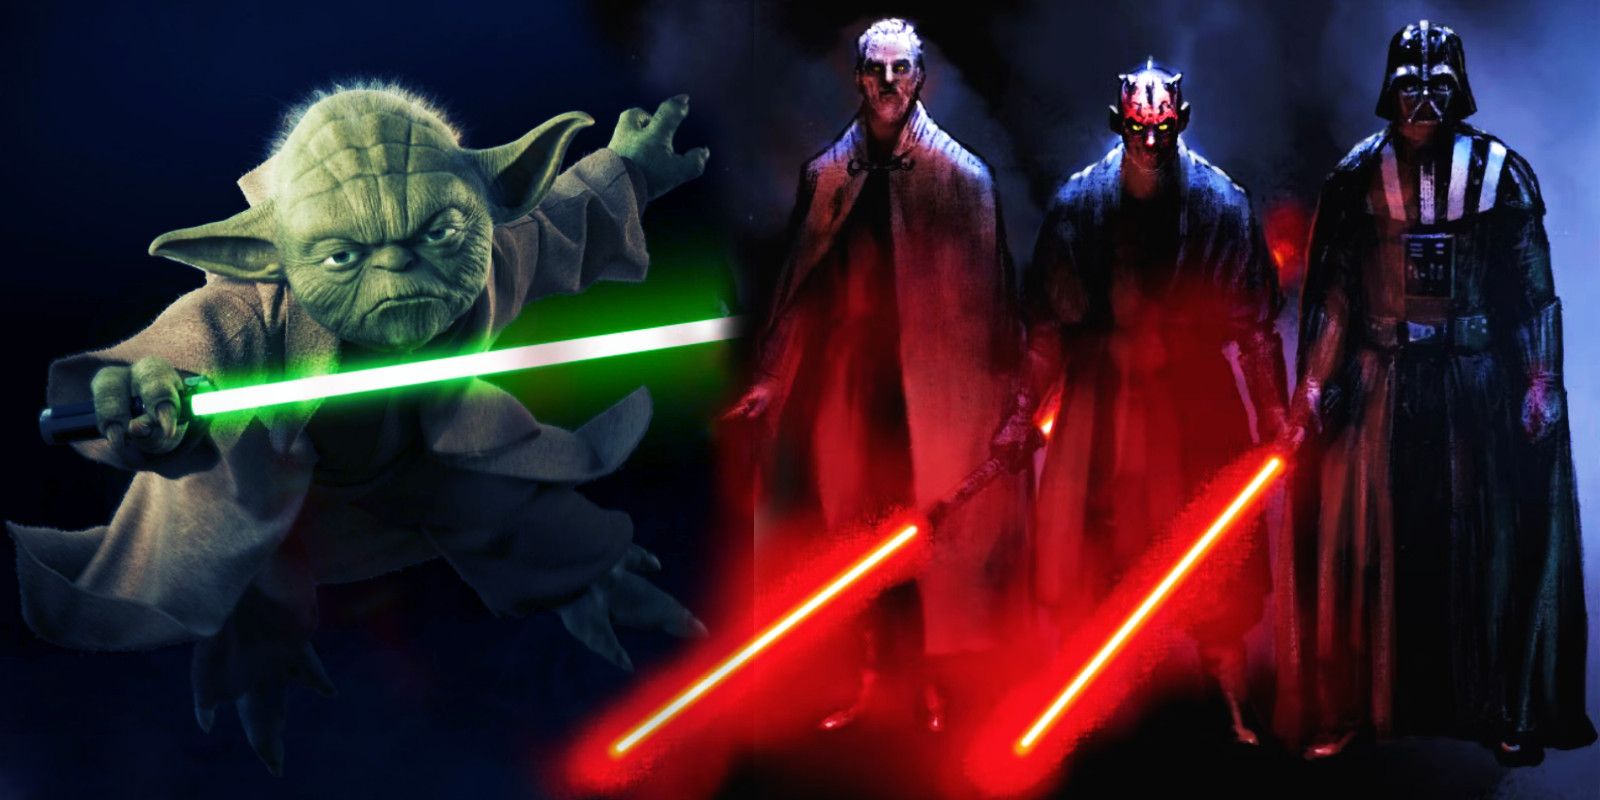 Yoda and the Sith 